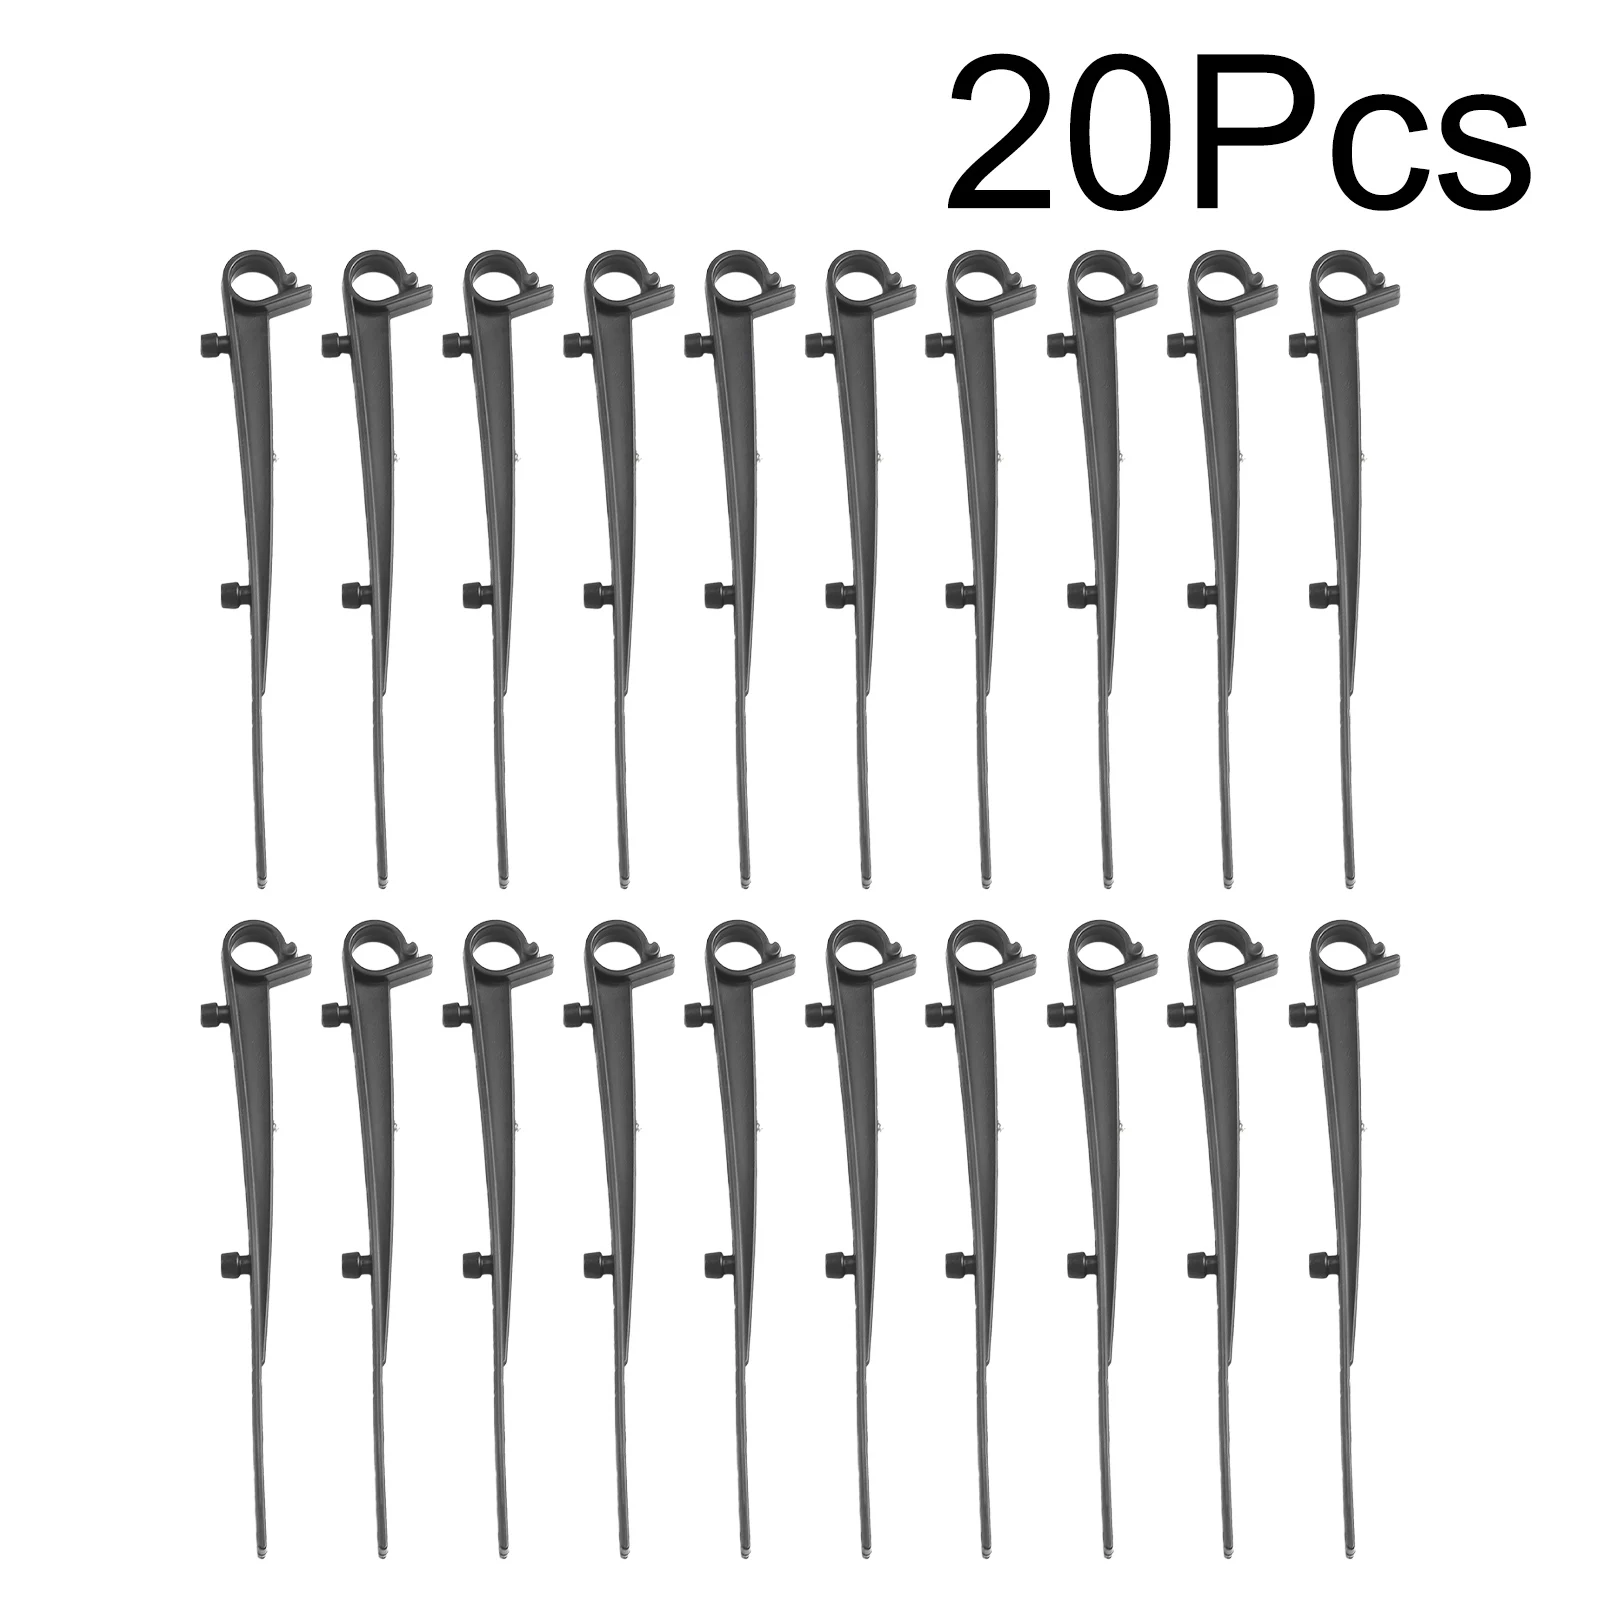 

20pcs Universal Gutter Clip For Keep Your Gutters Clean With Universal Gutter Brush Clips Garden Hand Tools Replacement Parts